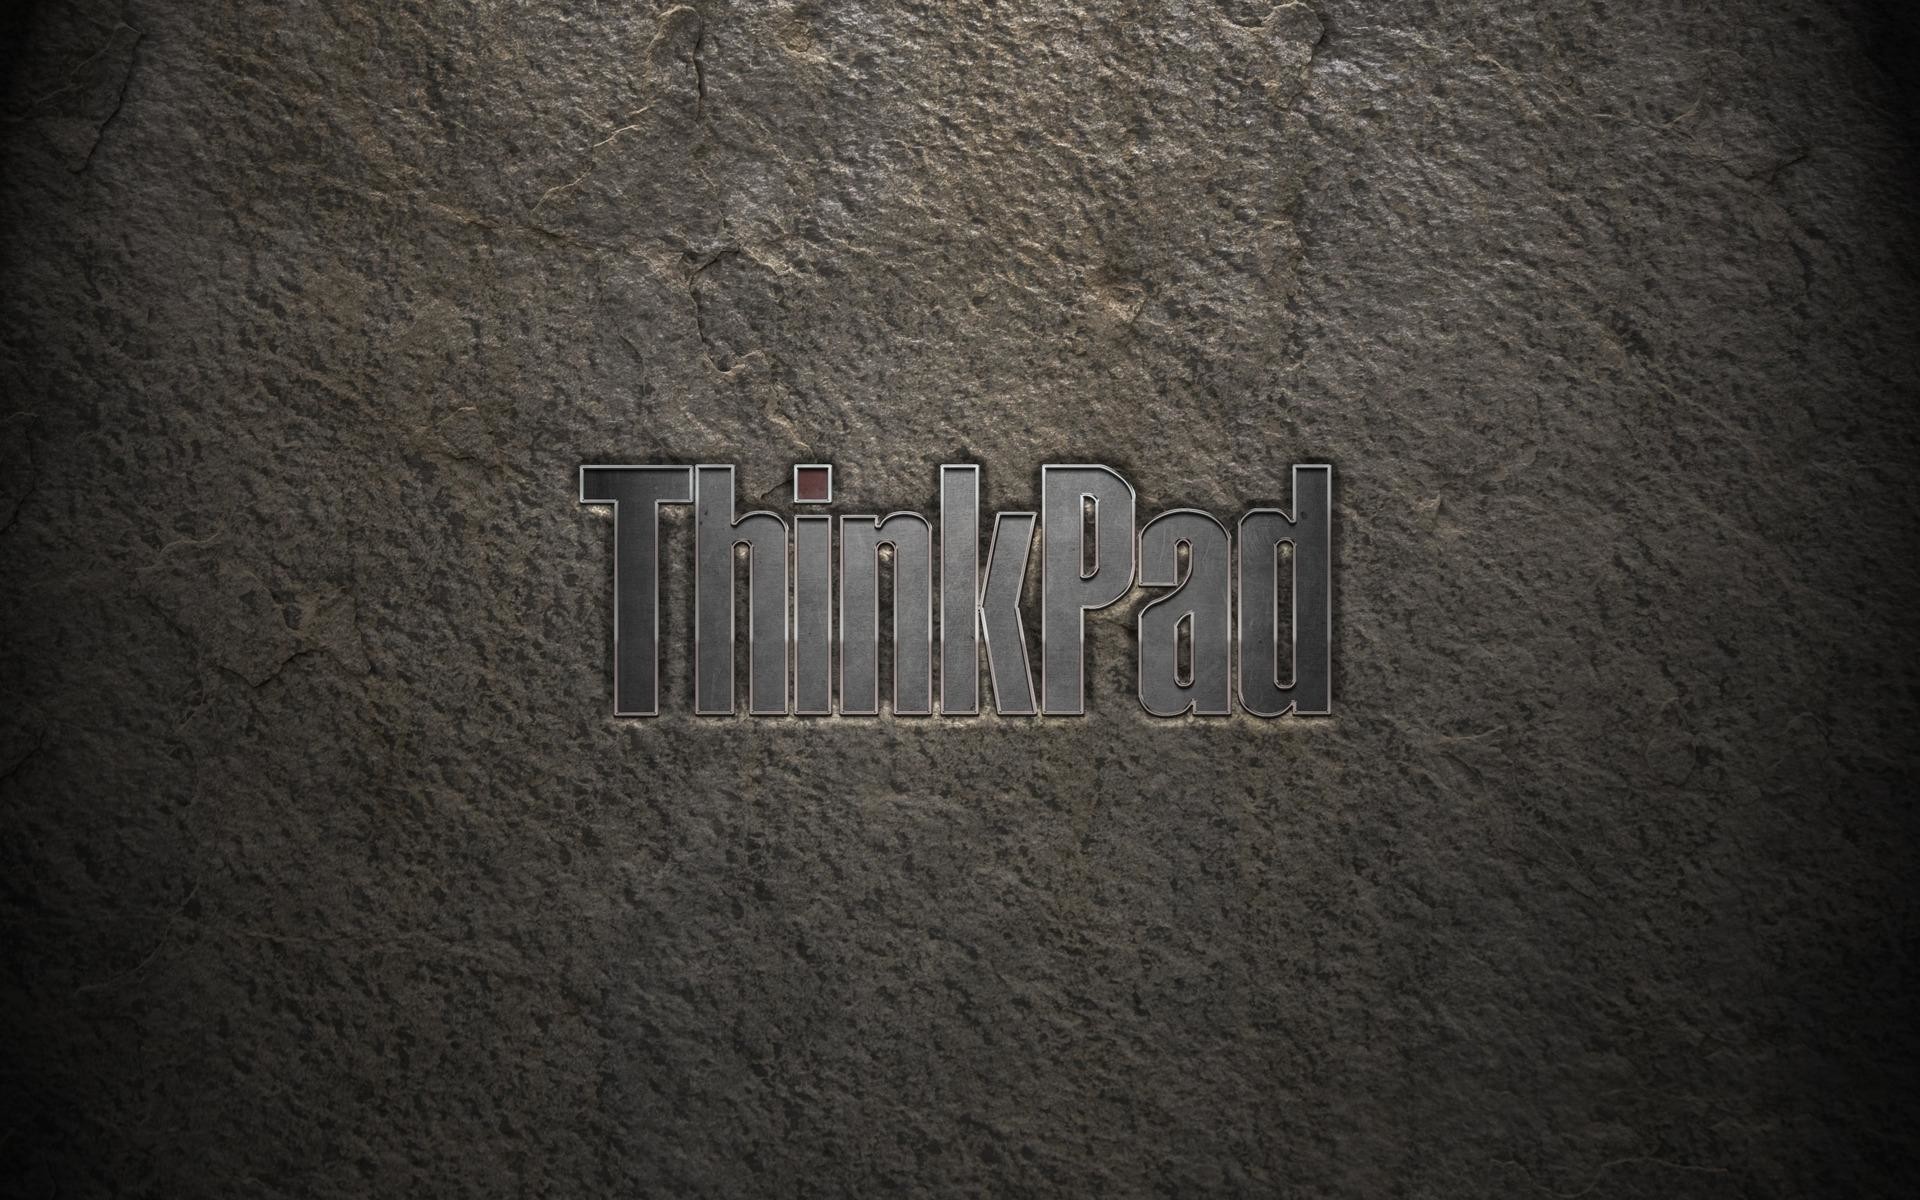 1920x1200 Free Download Lenovo Thinkpad Backgrounds - Page 2 of 3 - wallpaper.wiki